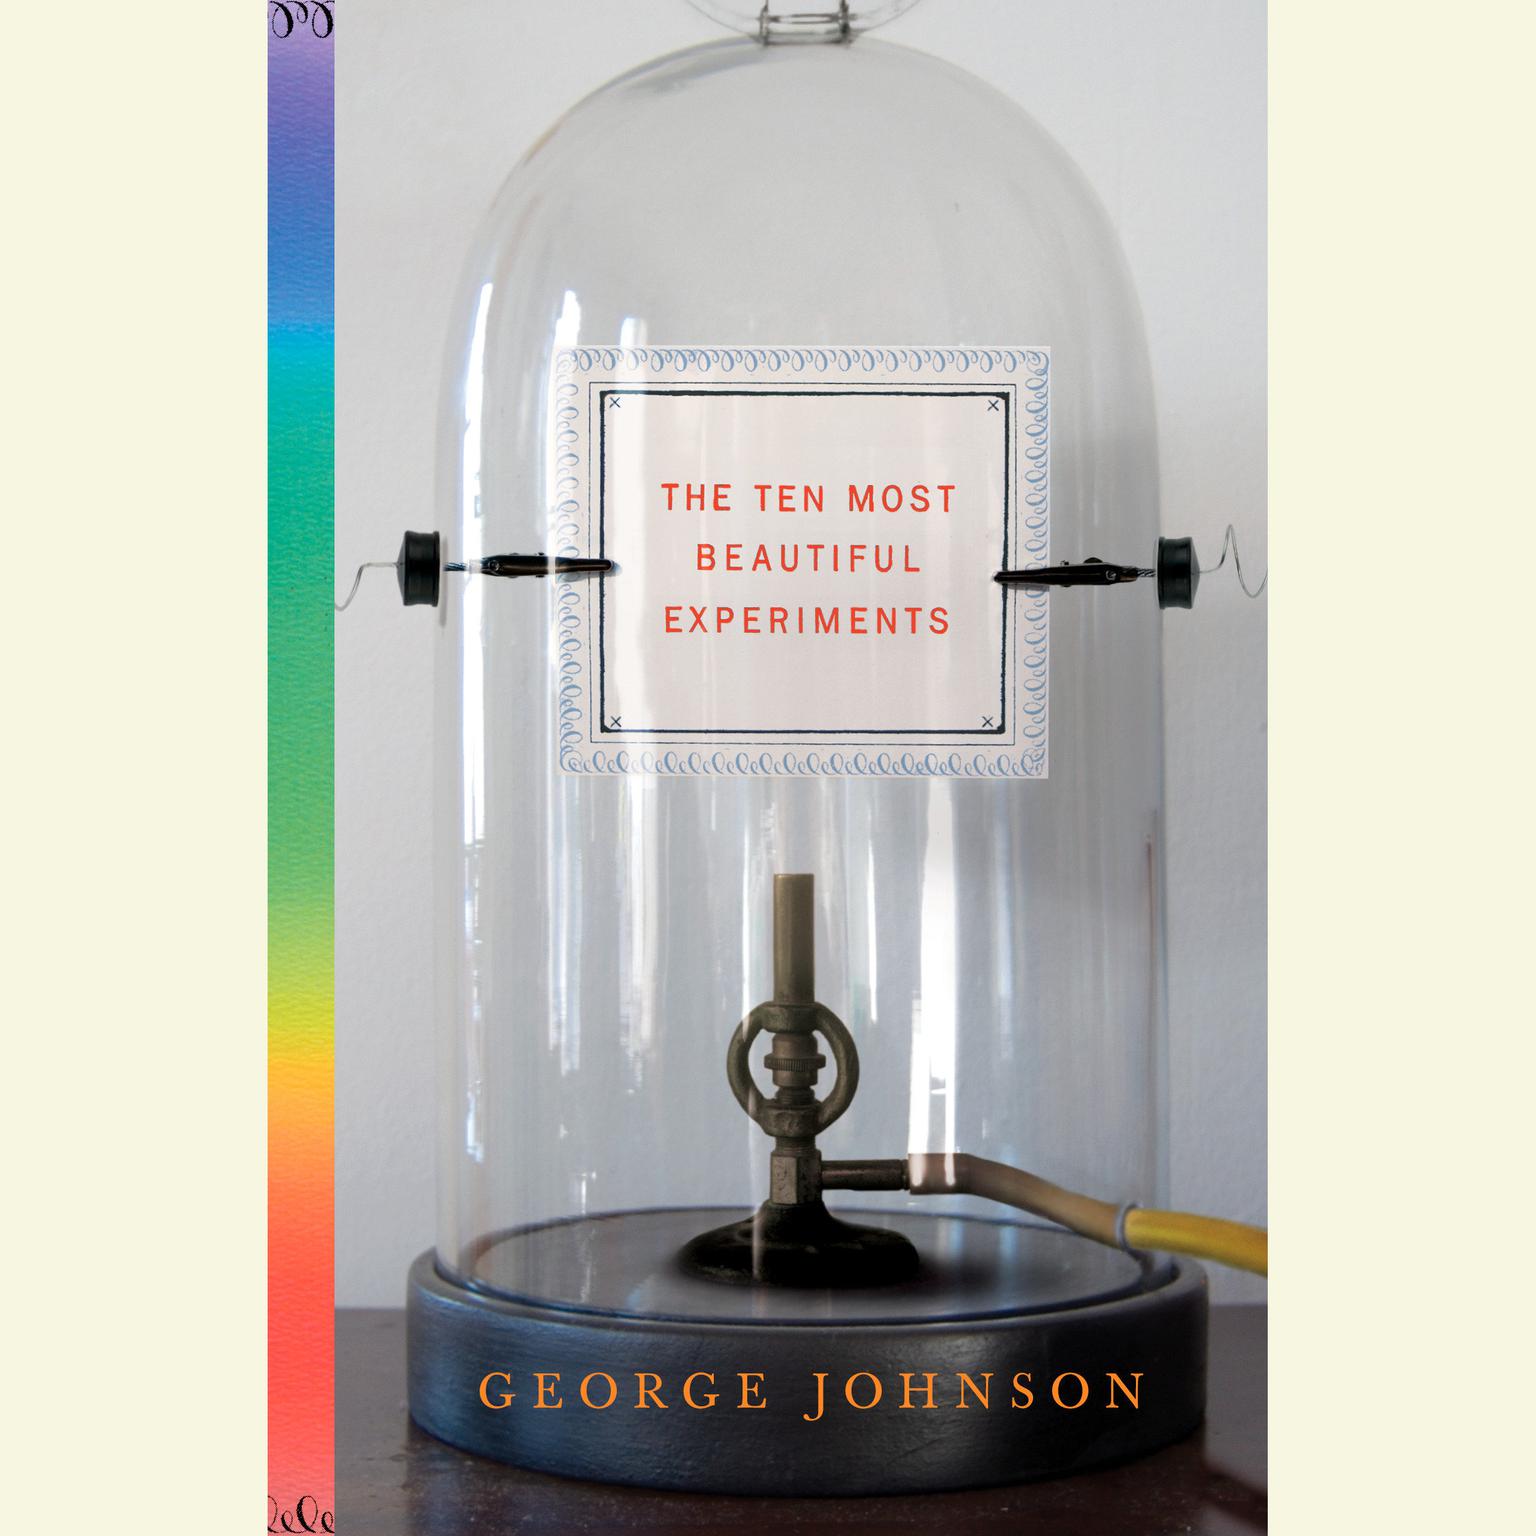 The Ten Most Beautiful Experiments (Abridged) Audiobook, by George Johnson